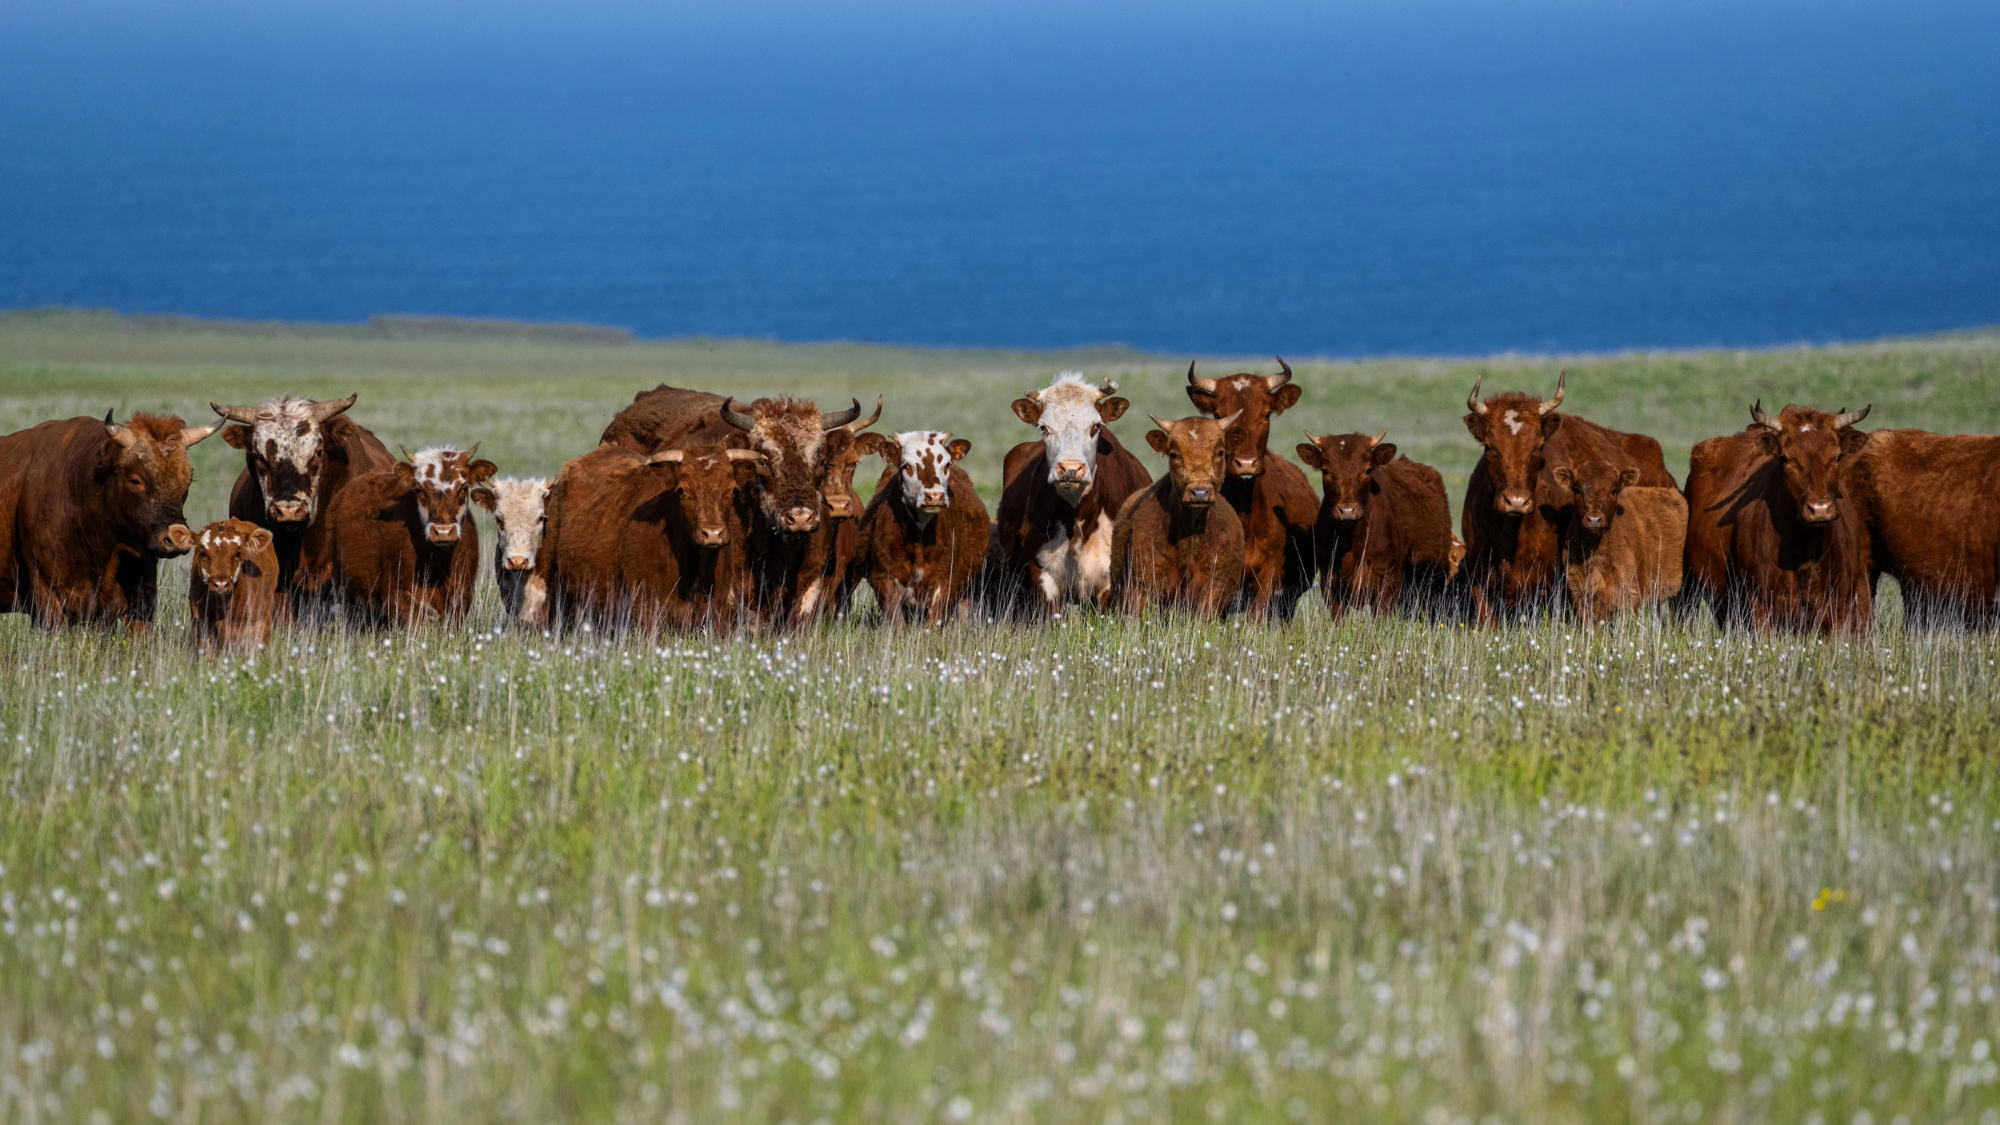 This is what happens when feral cows take over a remote Alaskan island